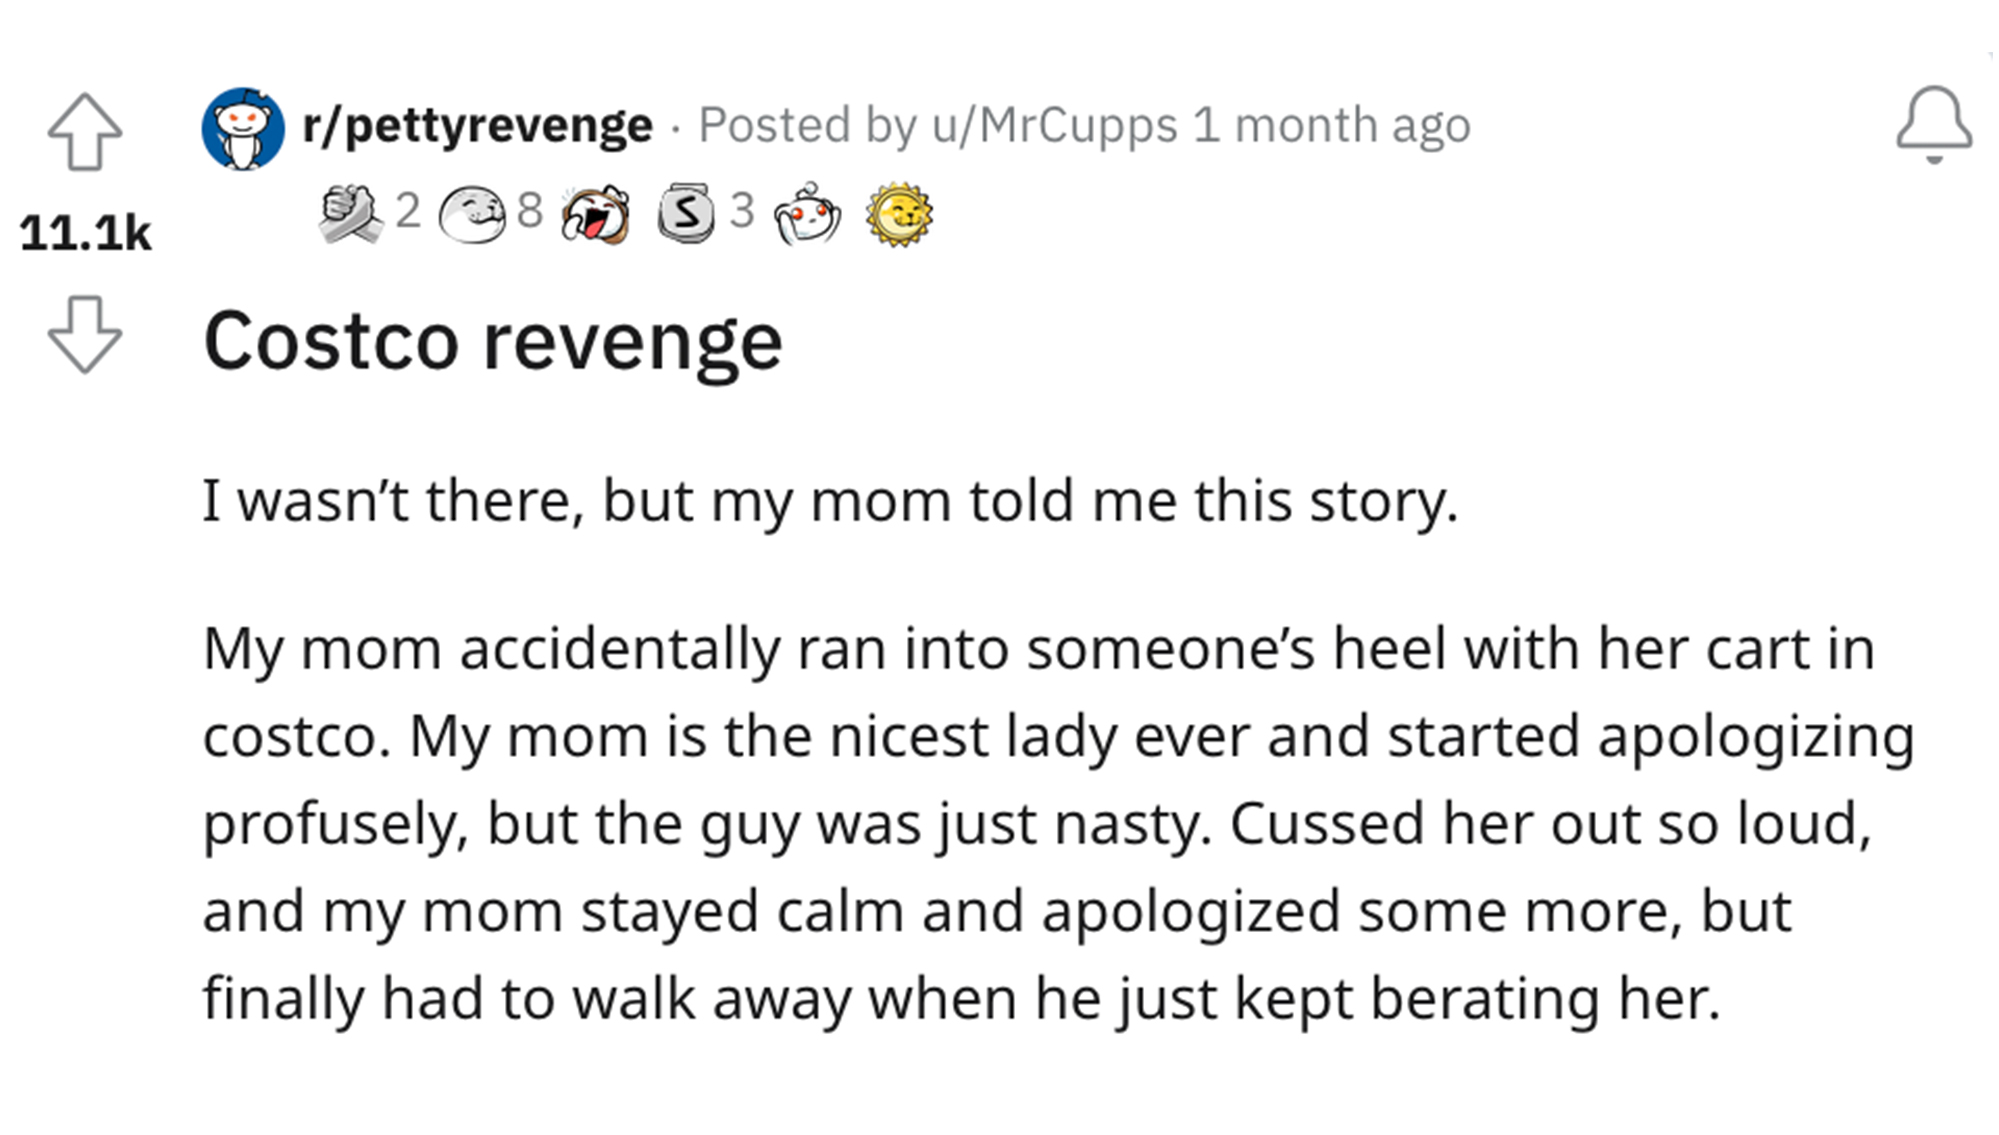 costco revenge story - document - rpettyrevenge Posted by uMrCupps 1 month ago $3 28 Costco revenge I wasn't there, but my mom told me this story. My mom accidentally ran into someone's heel with her cart in costco. My mom is the nicest lady ever and star